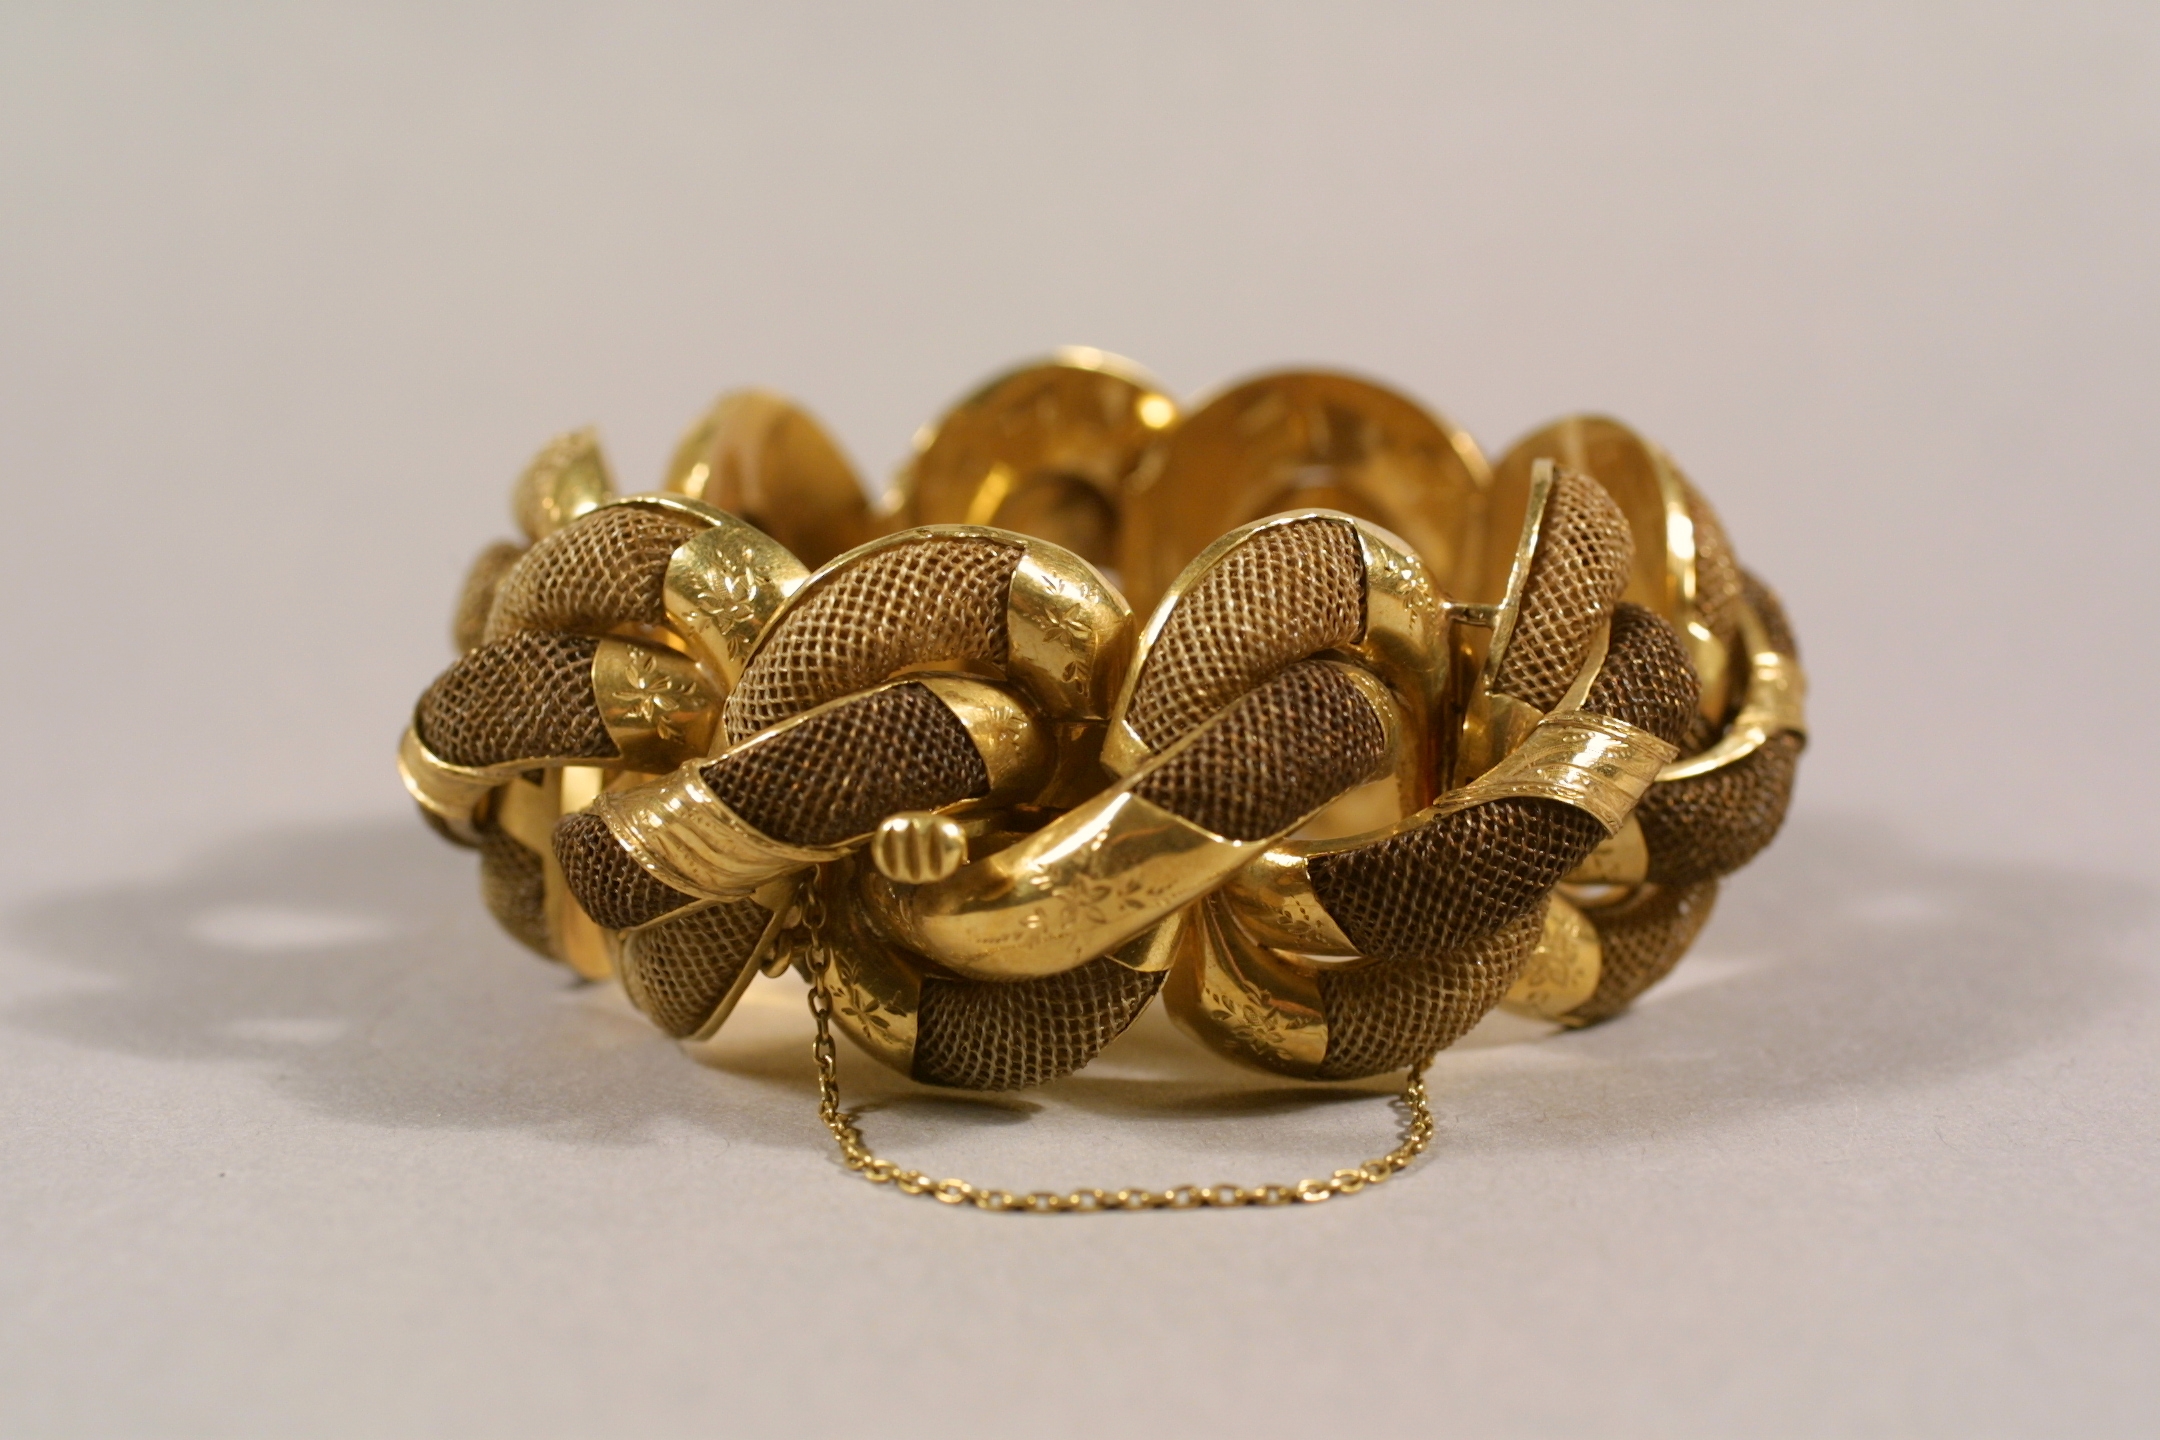 ID: A golden hair bracelet weaved with interlocking segments of gold chain and sold gold with a smaller gold chain attached and hanging underneath